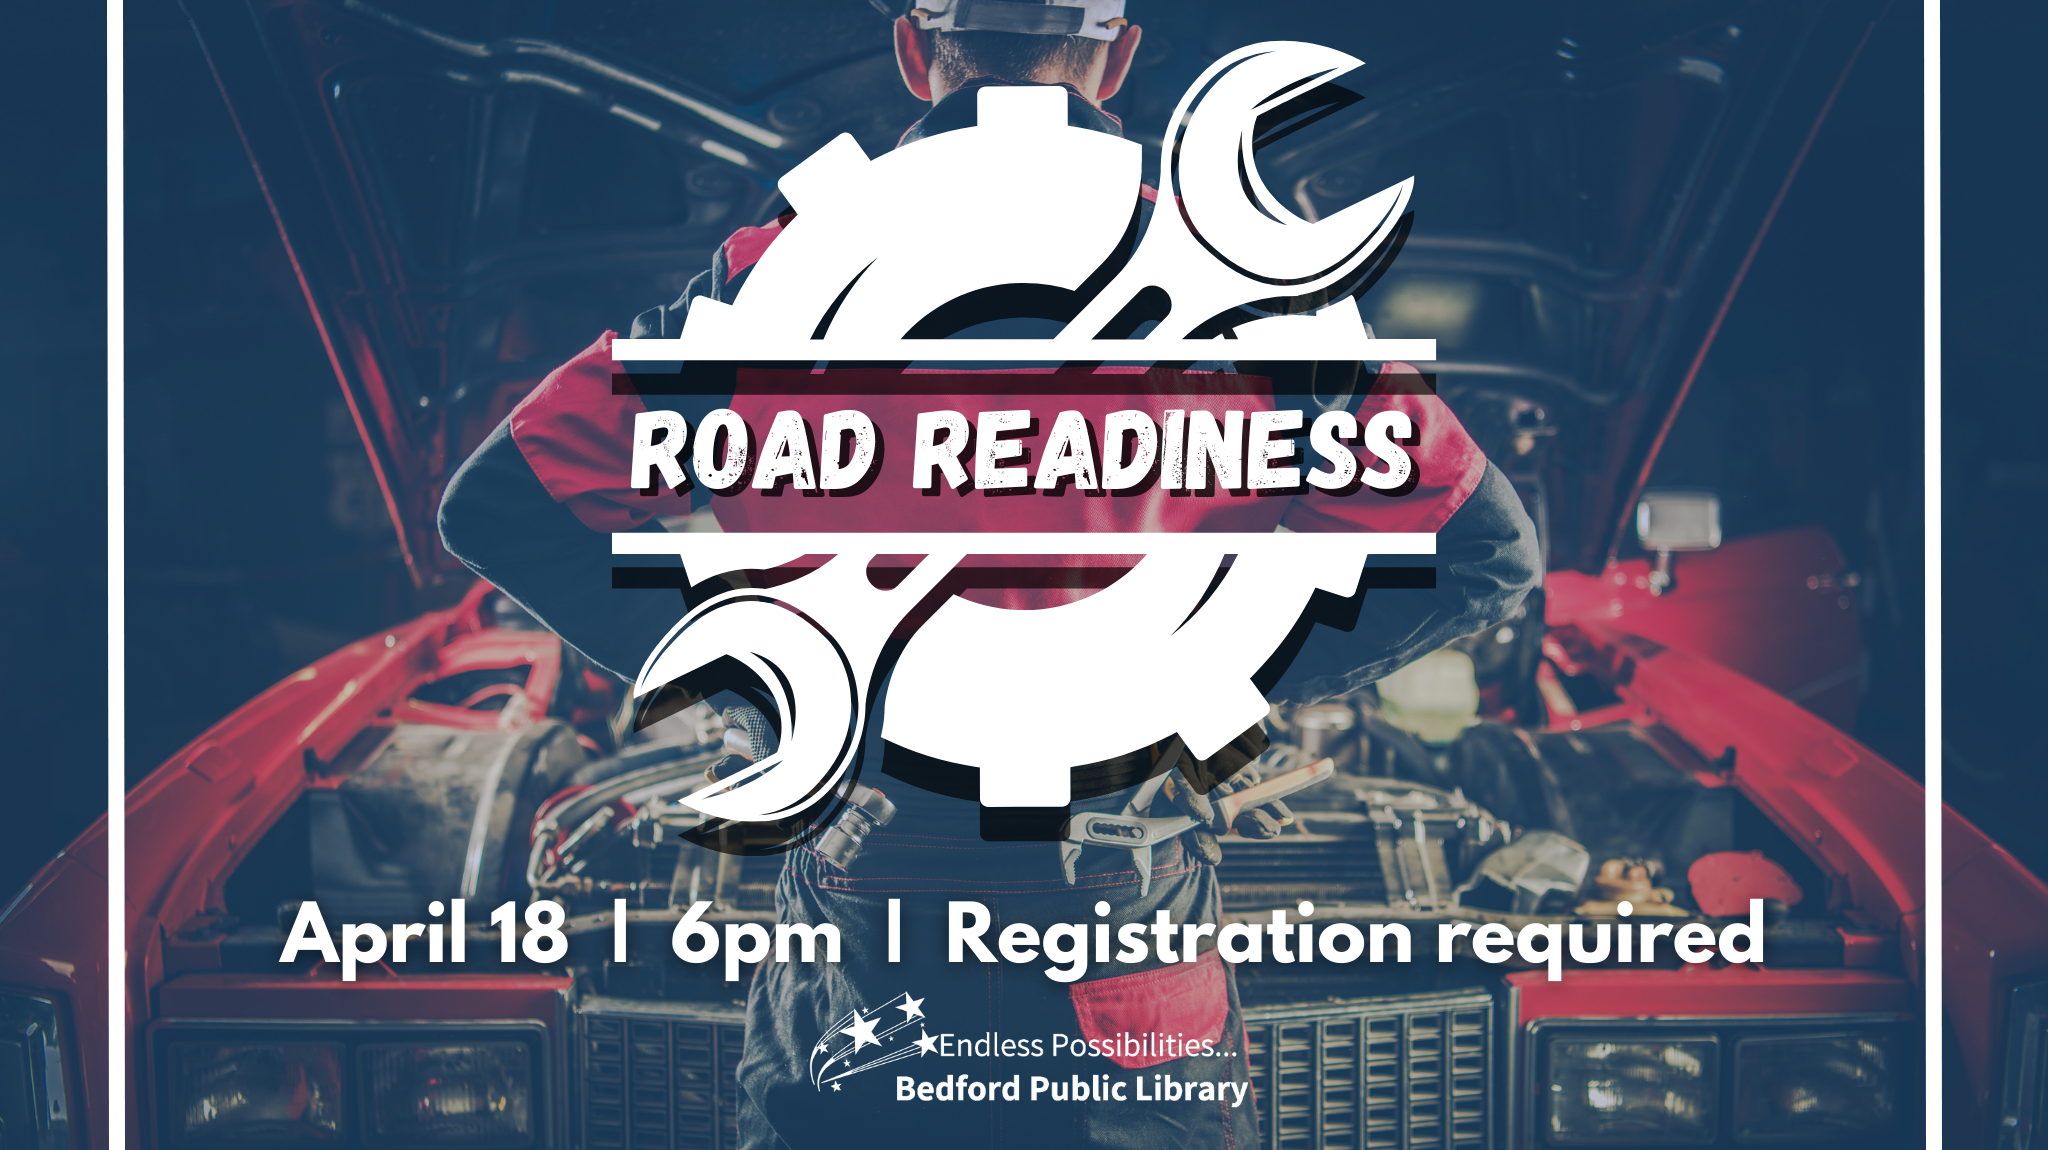 Road Readiness on April 18th at 6pm